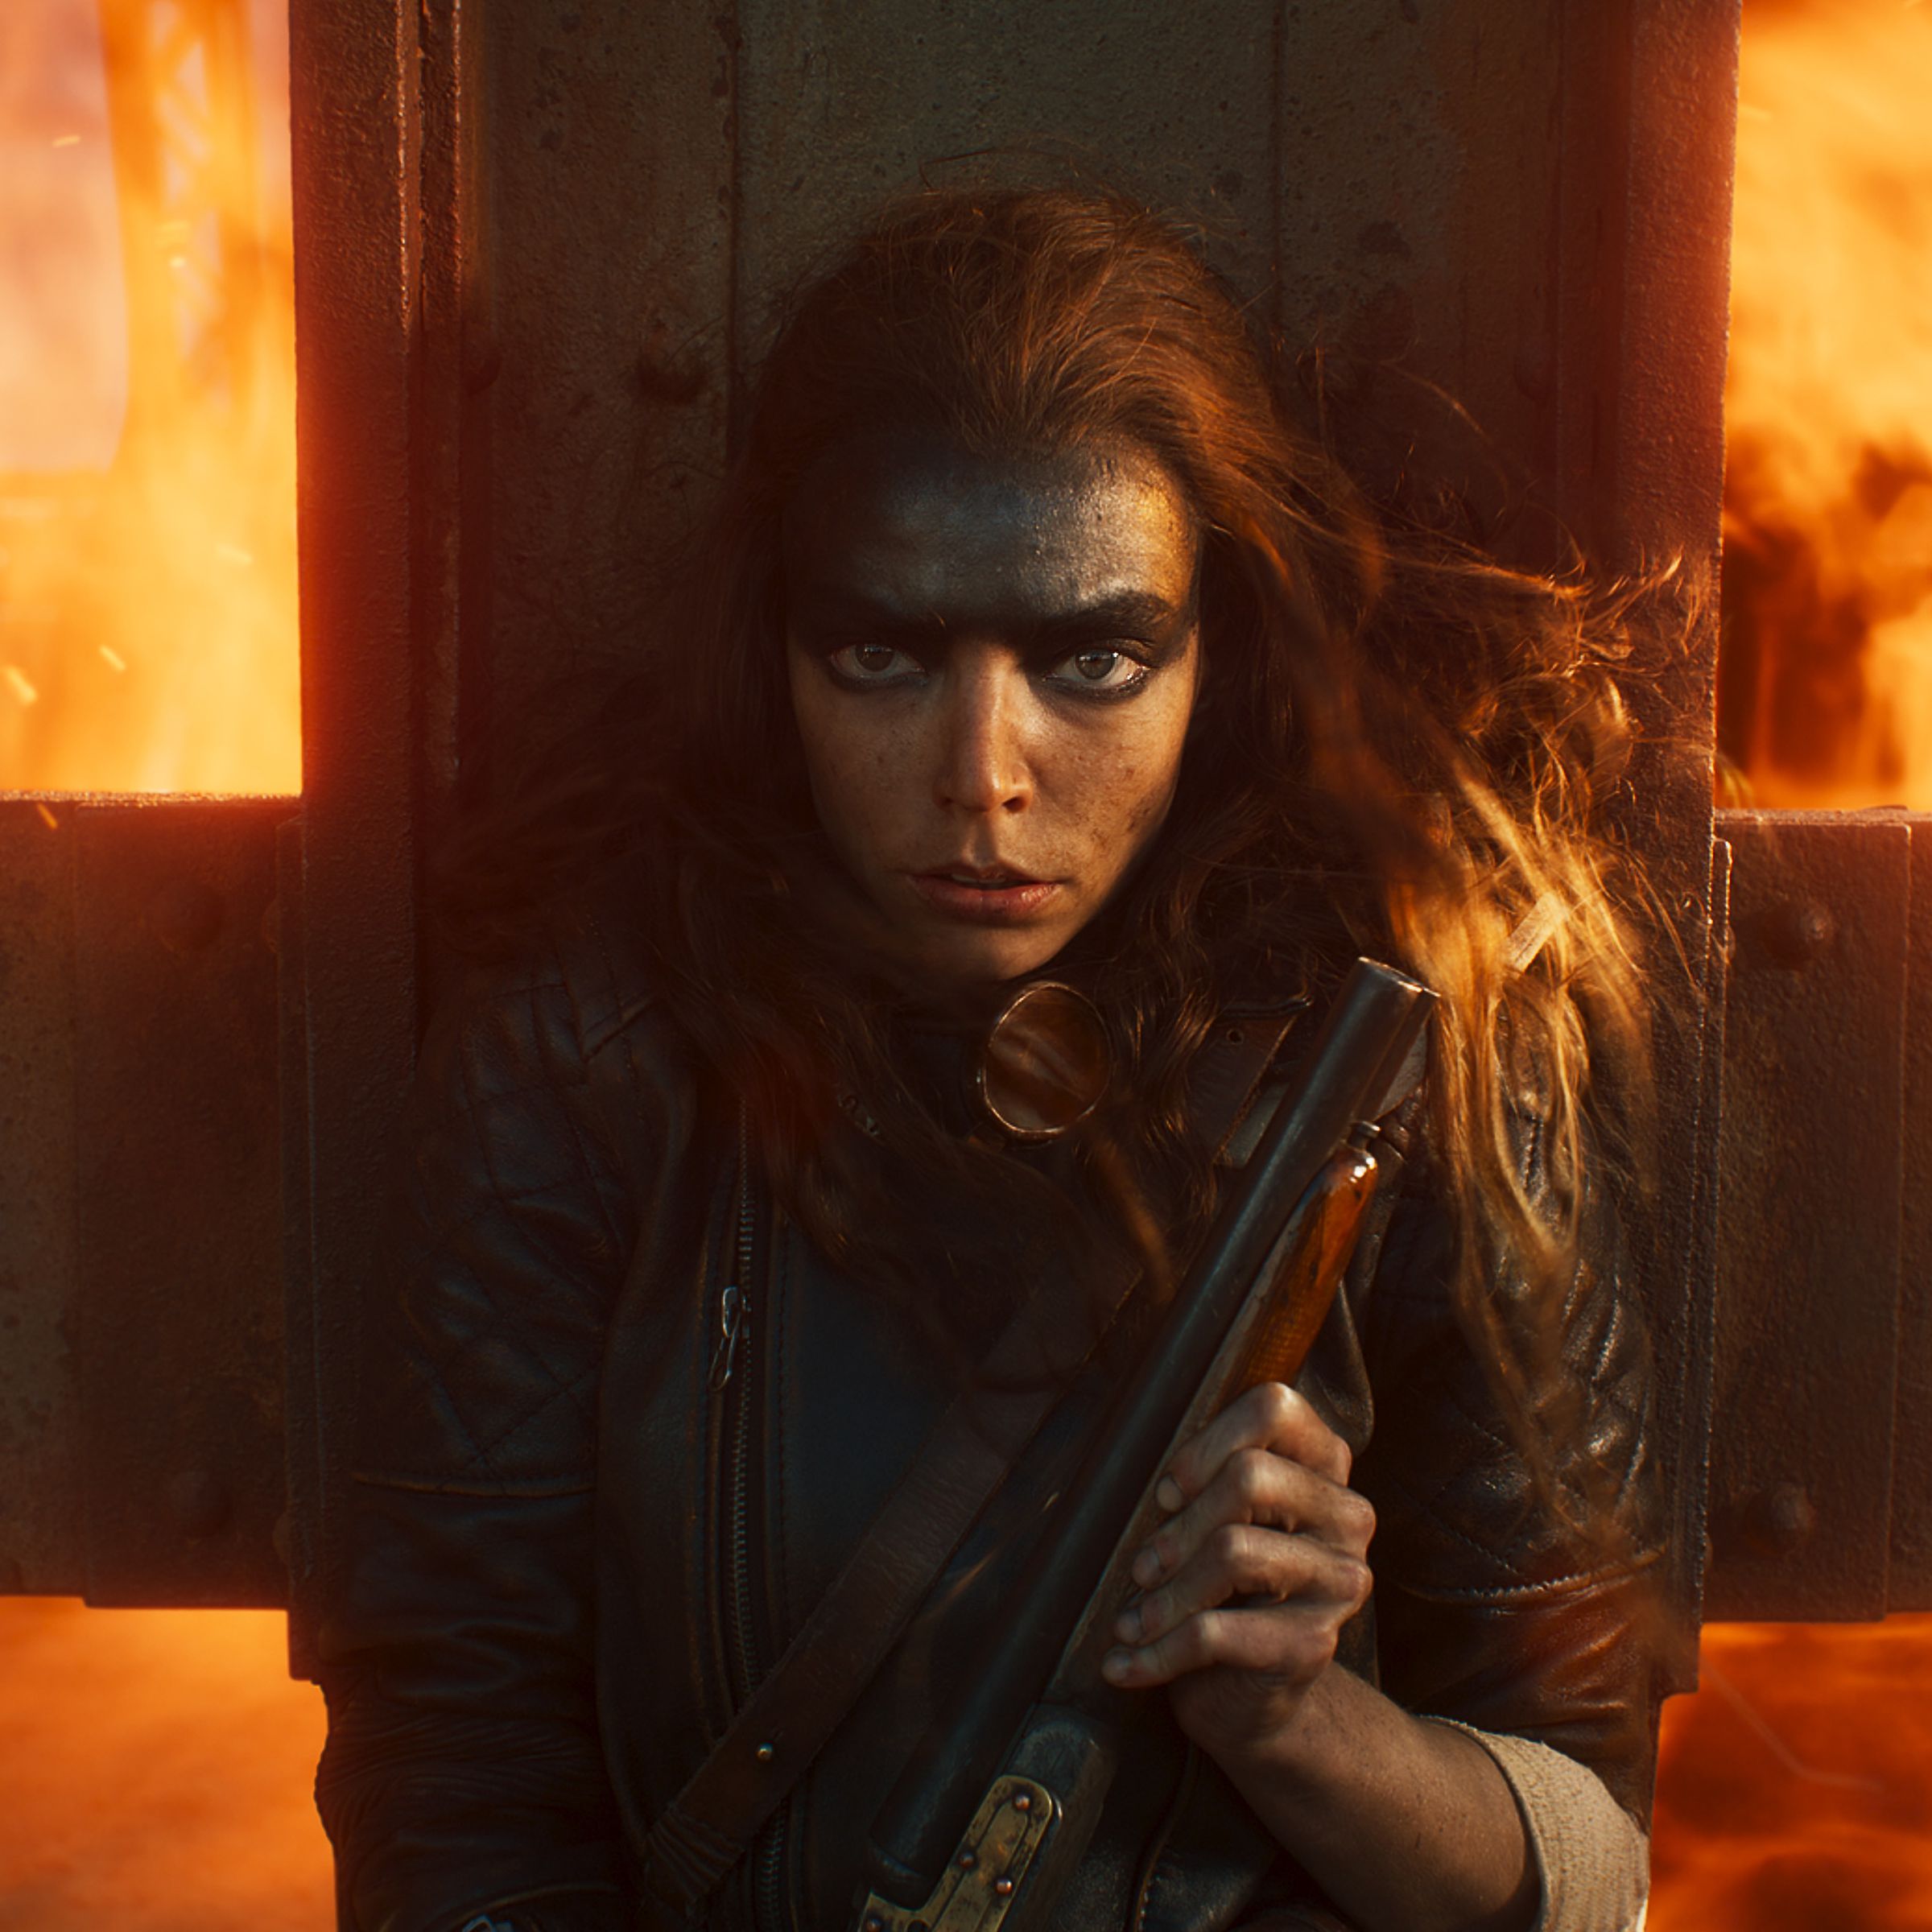 A woman clutching a shotgun to her chest while pressing up against a metal grate to protect herself from a wall of flames rushing up from behind her.